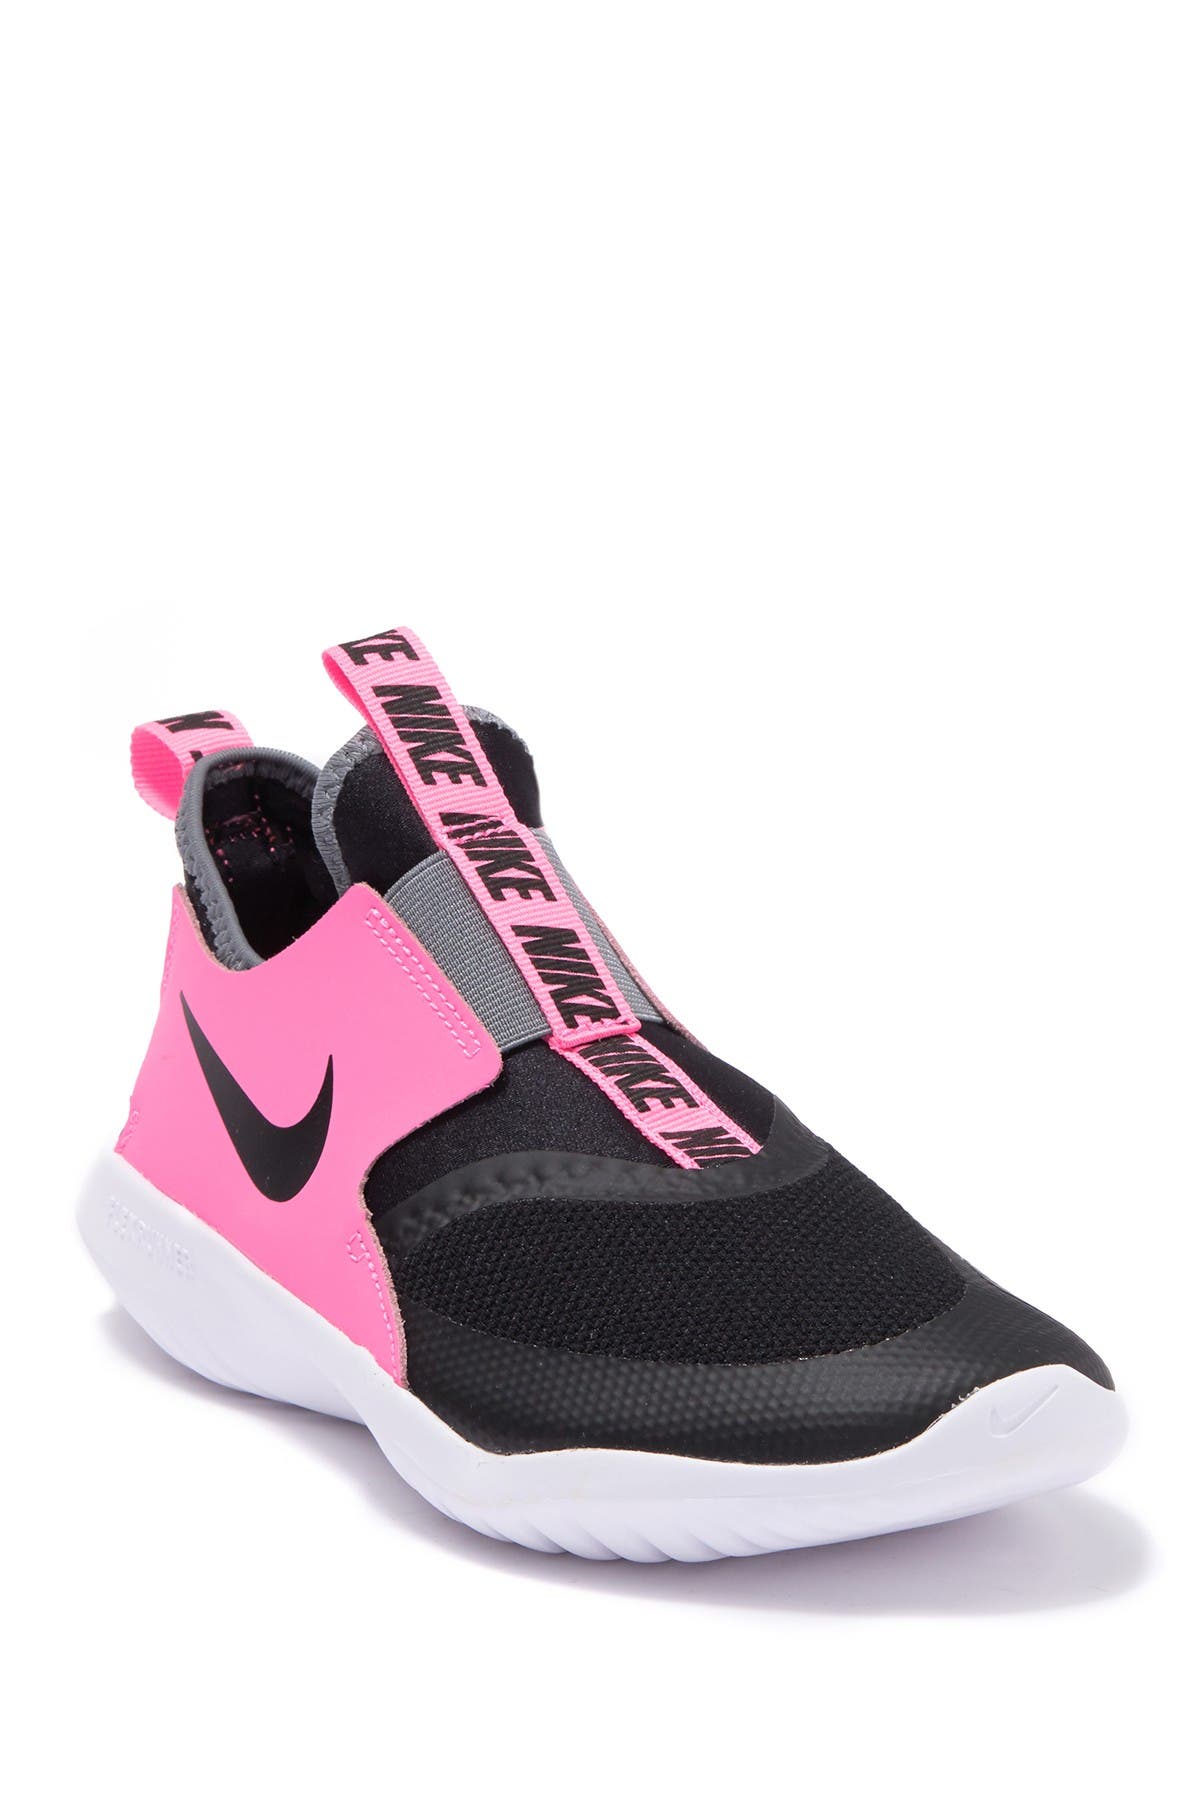 nordstrom youth shoes